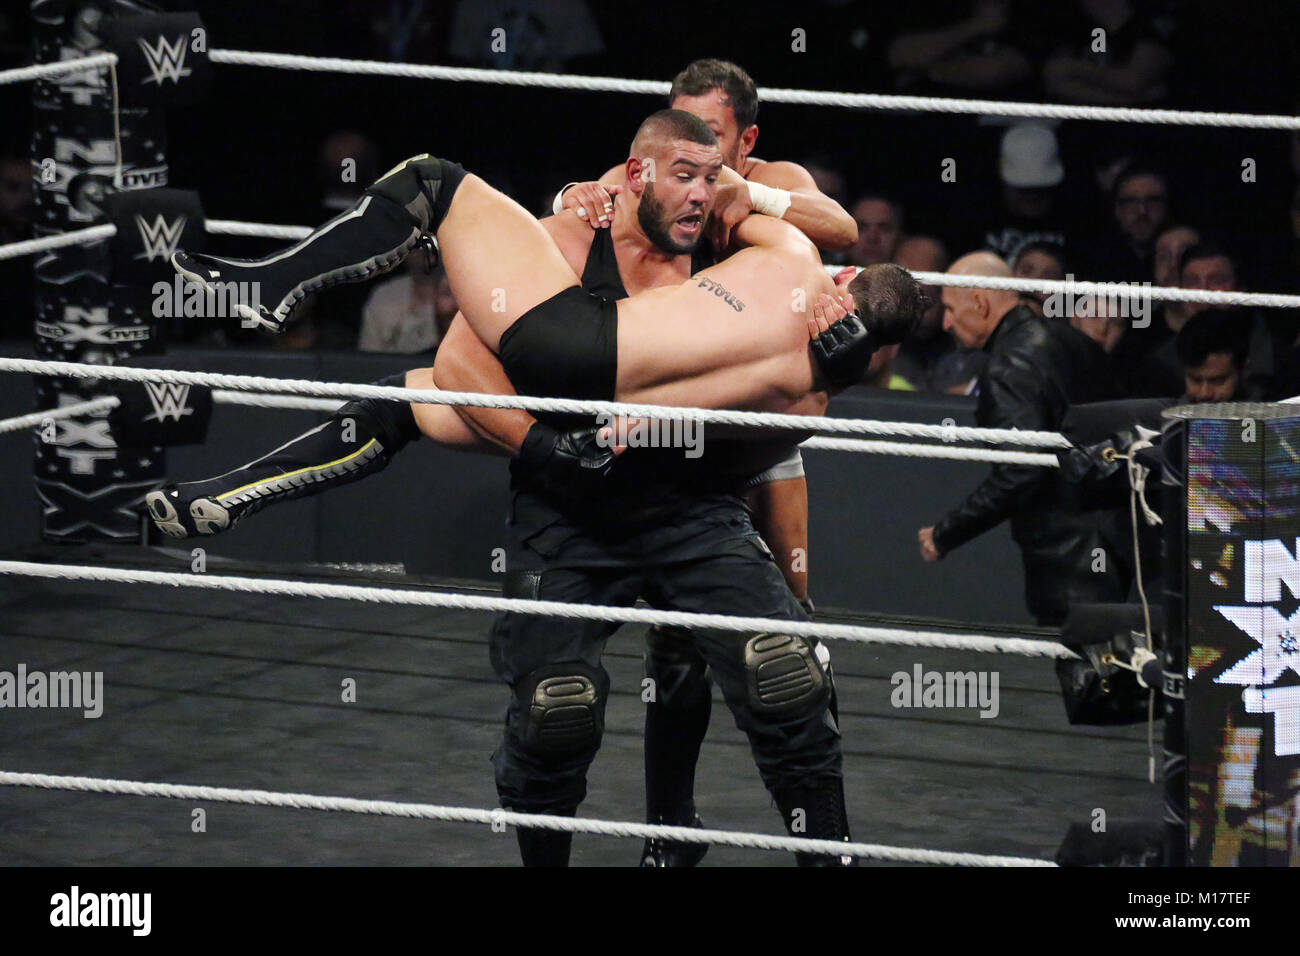 Philadelphia, PA, USA. 27th Jan, 2018. ERA wins match at WWE NXT Take Over at Wells Fargo Center in Philadelphia, Pa on January 27, 2018 Credit: Star Shooter/Media Punch/Alamy Live News Stock Photo